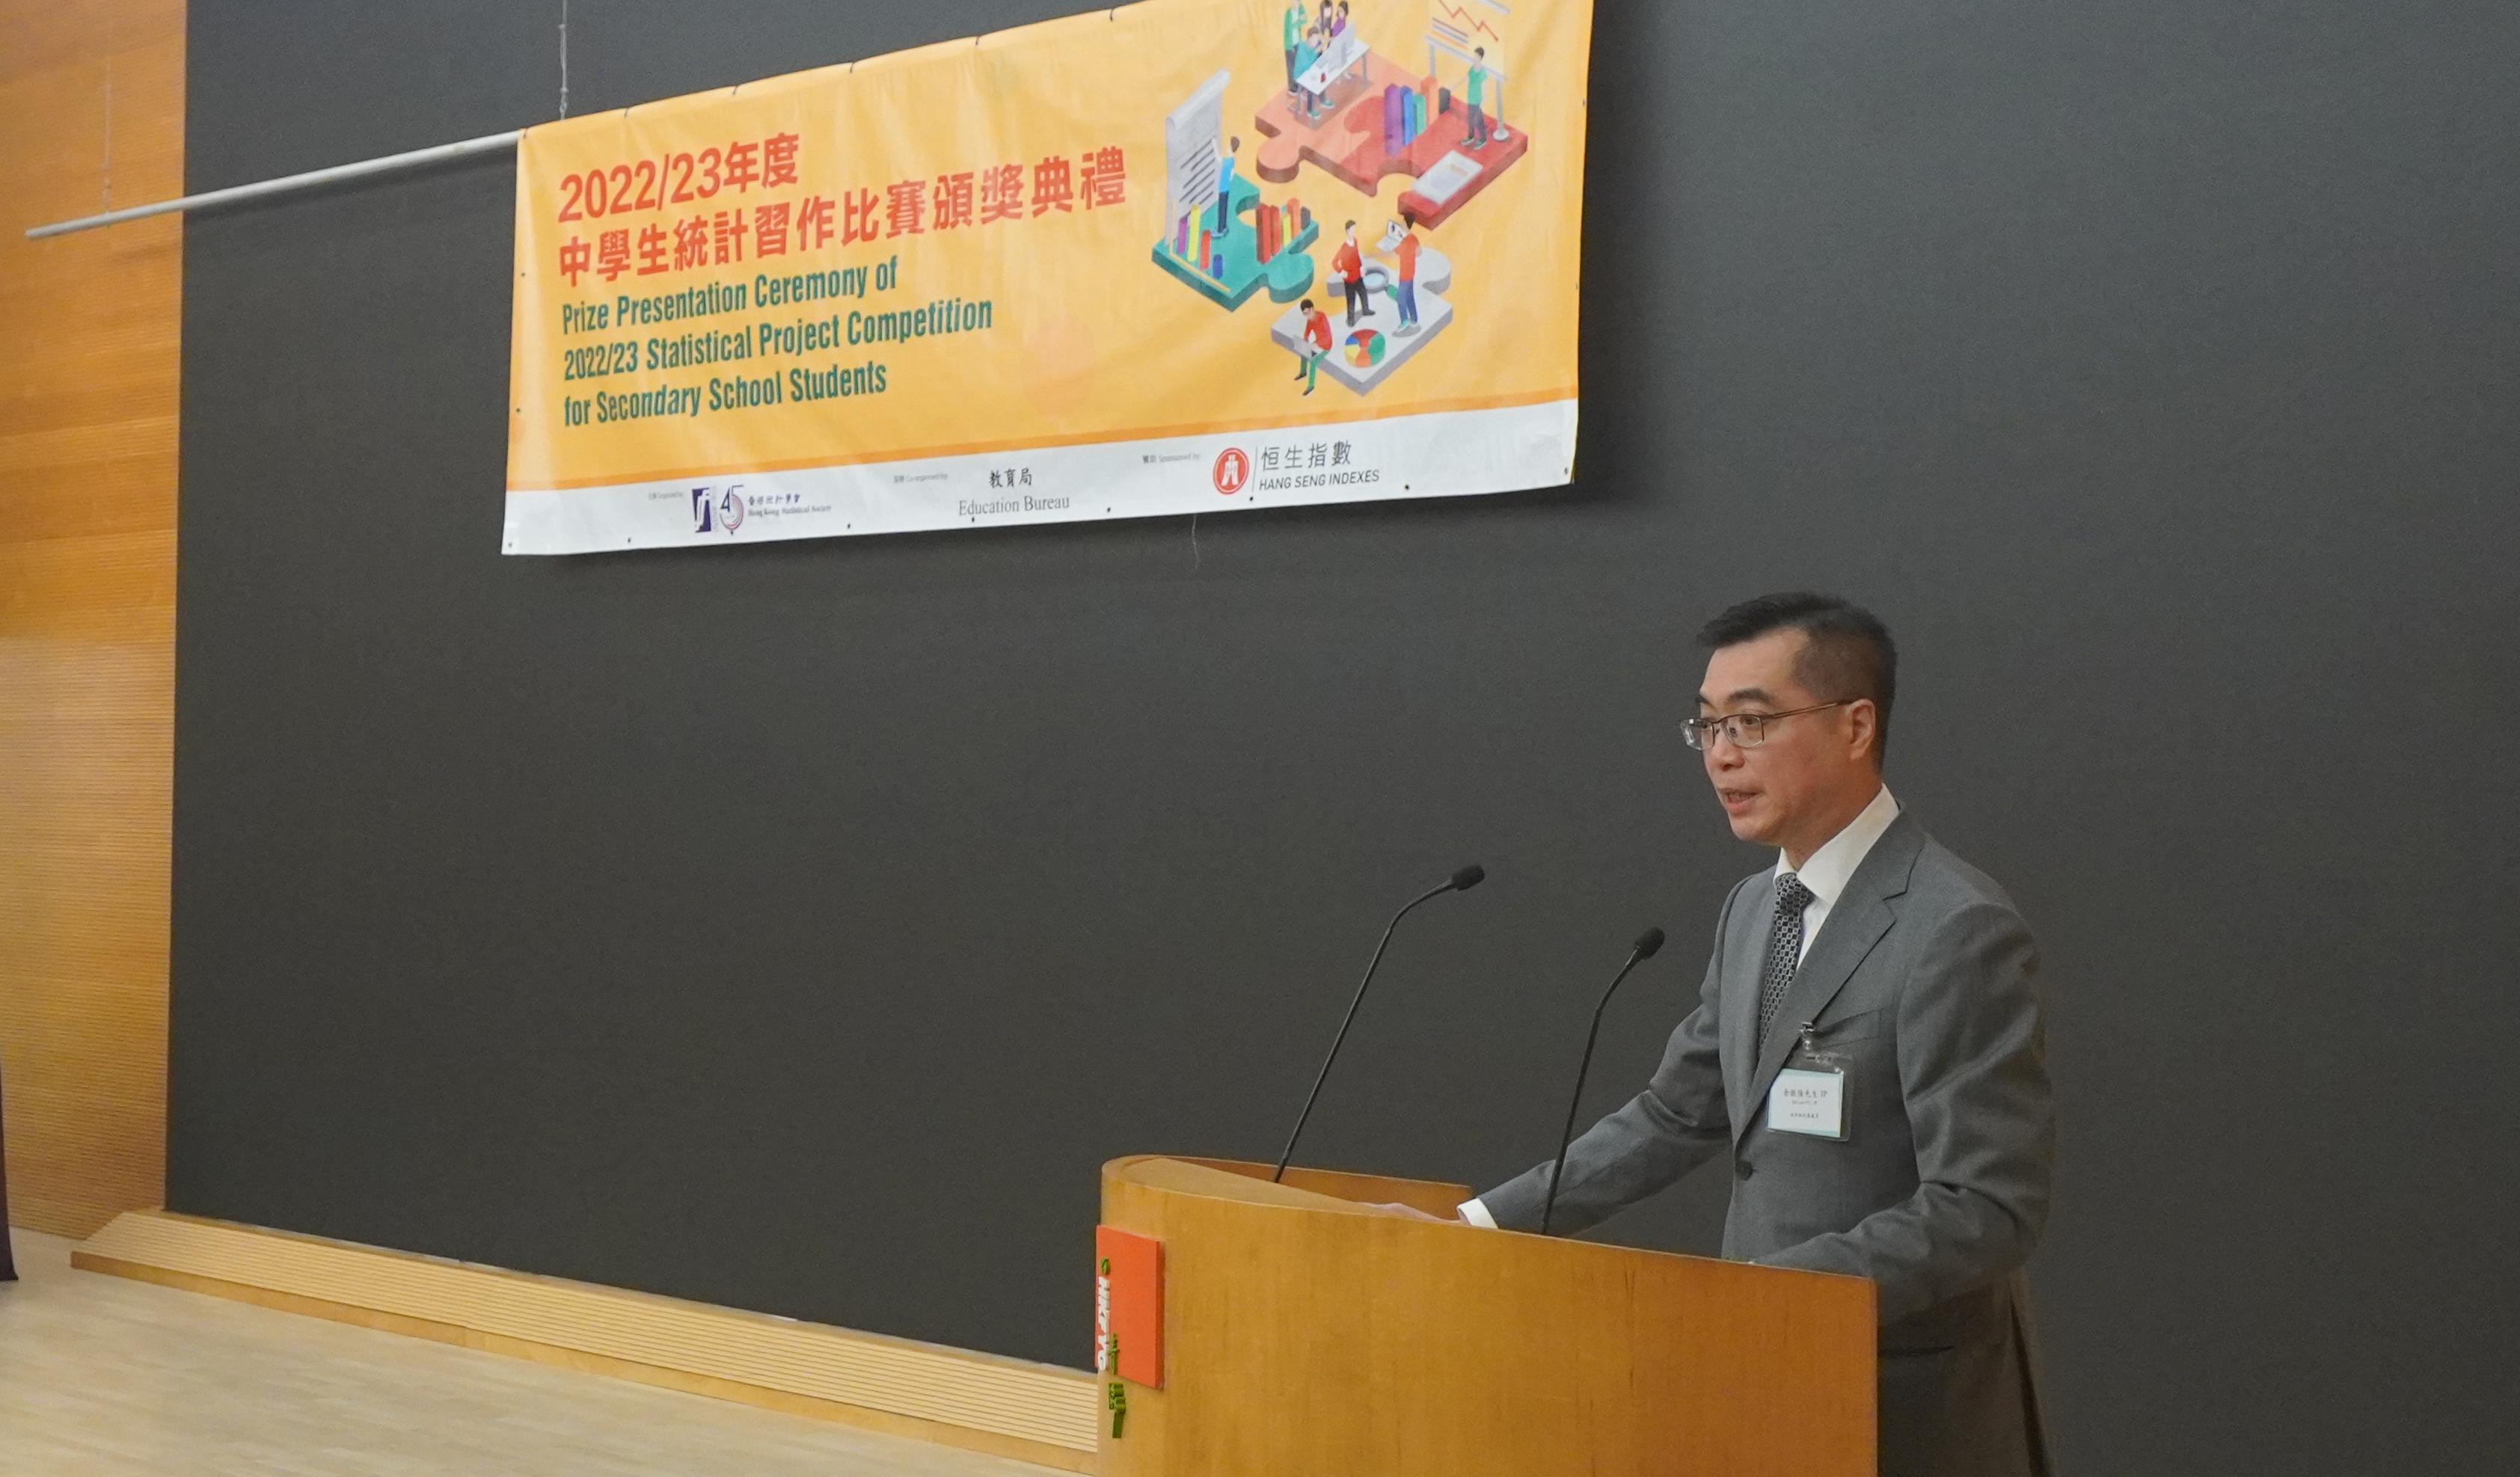 The Commissioner for Census and Statistics, Mr Leo Yu, delivered a speech at the prize presentation ceremony of 2022/23 Statistical Project Competition for Secondary School Students today (June 3).